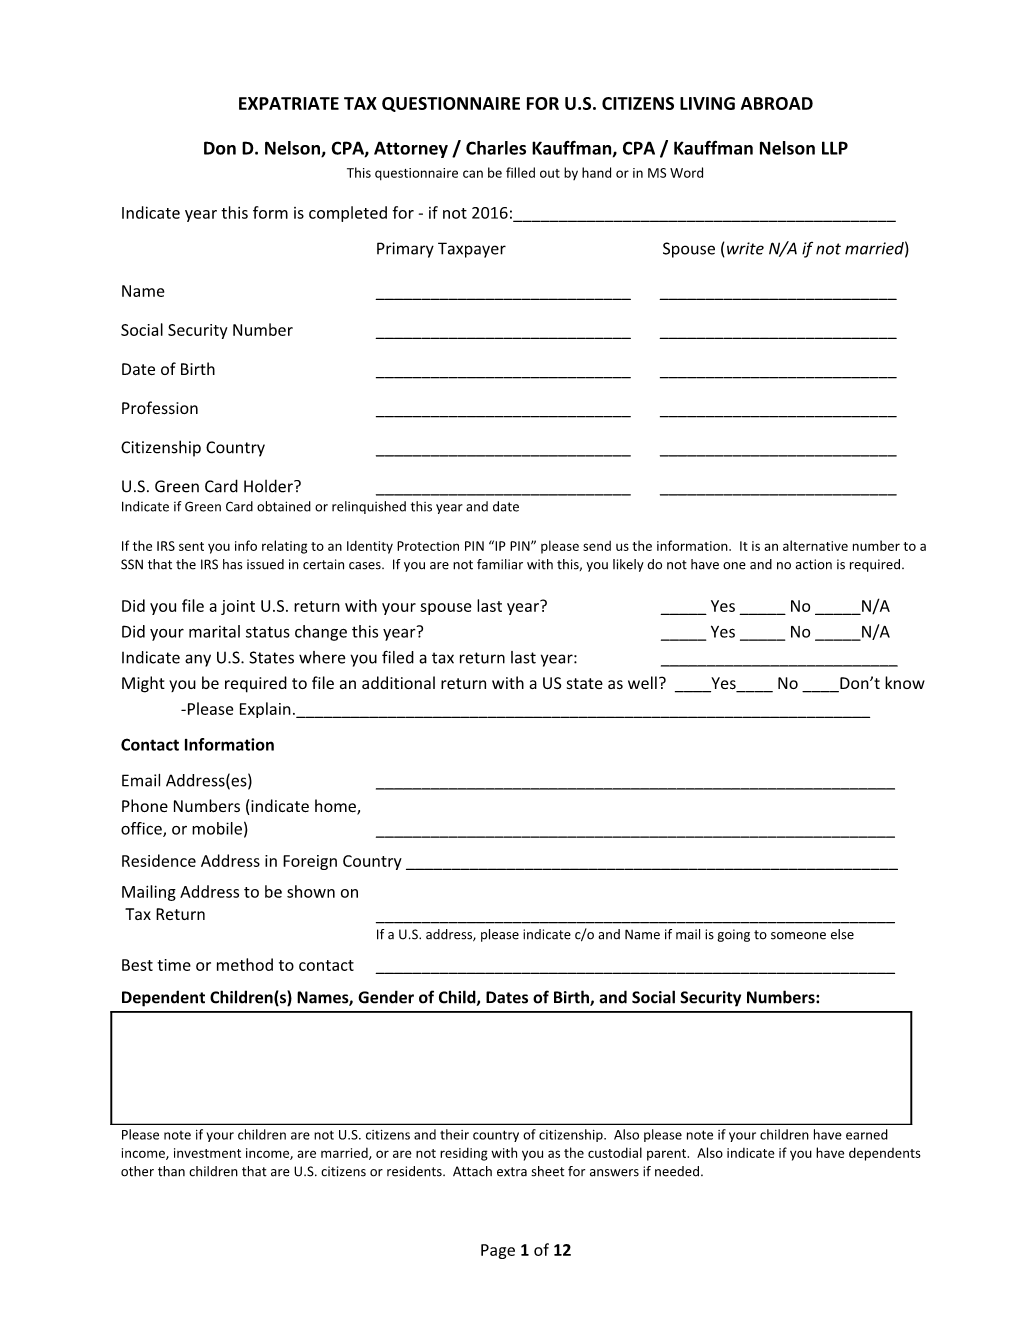 Expatriate Tax Questionnaire for U.S. Citizens Living Abroad